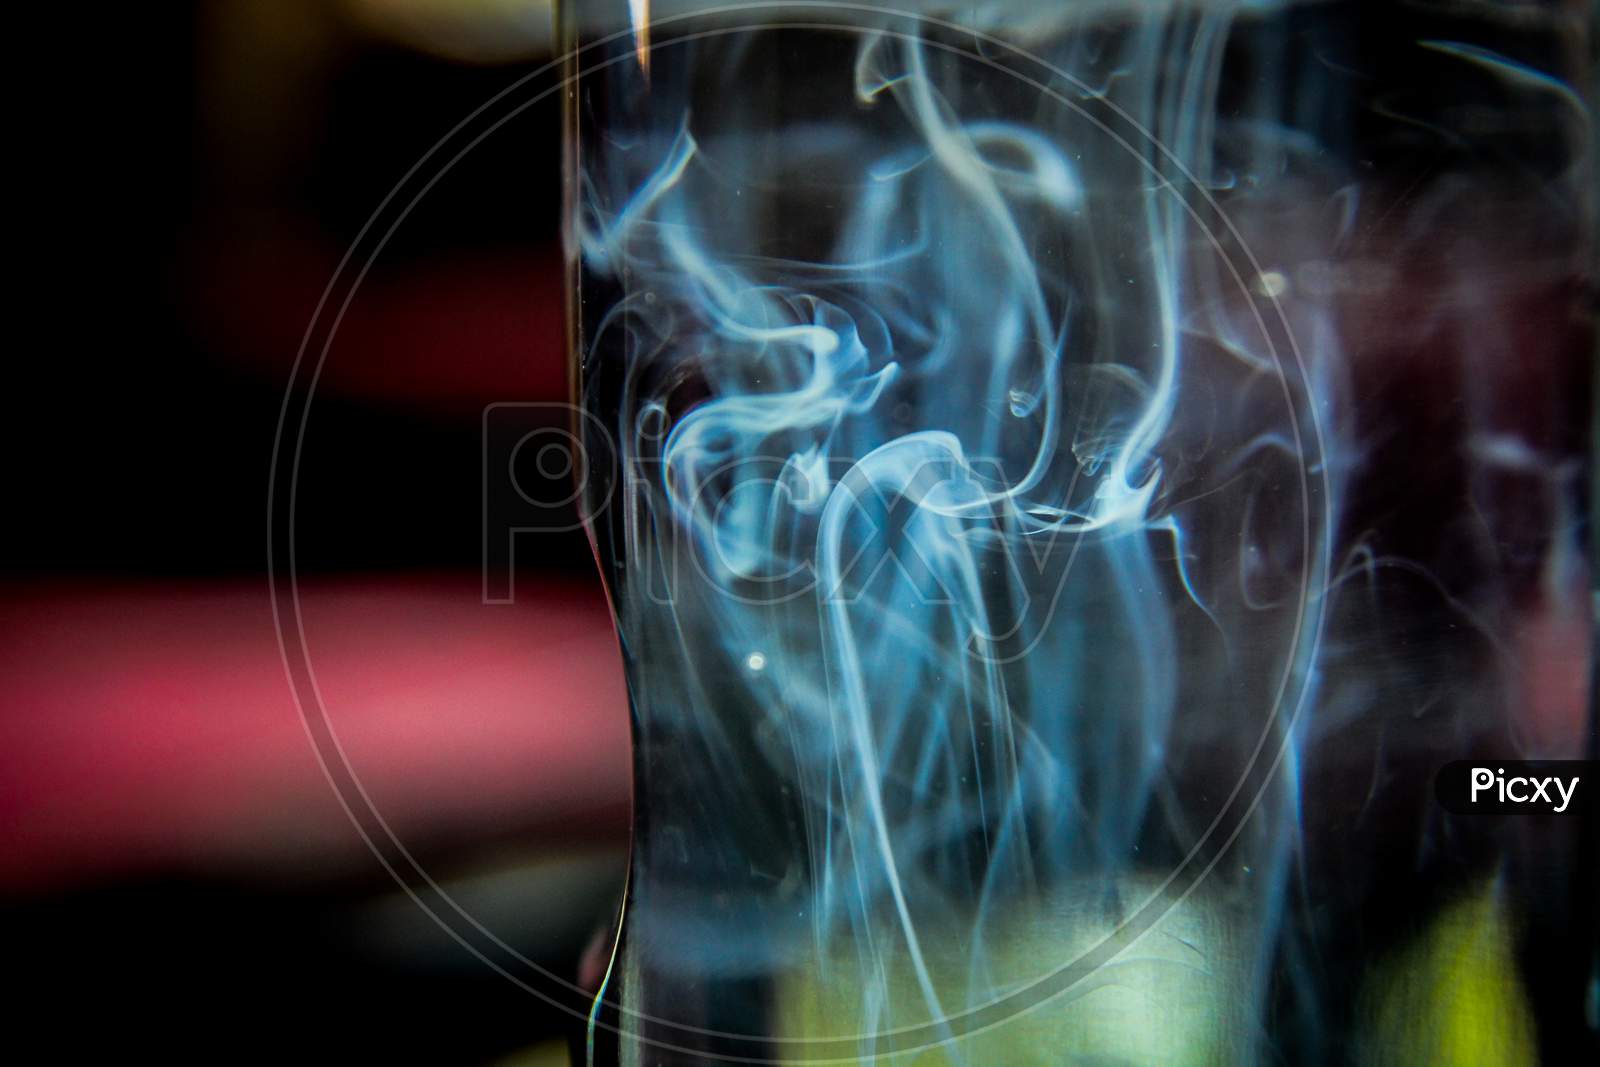 Chemical solution in water, chemical composition creates smokey pattern into the water, a medicine testing in a medical lab, blurry images with selective focus point on smokey effect